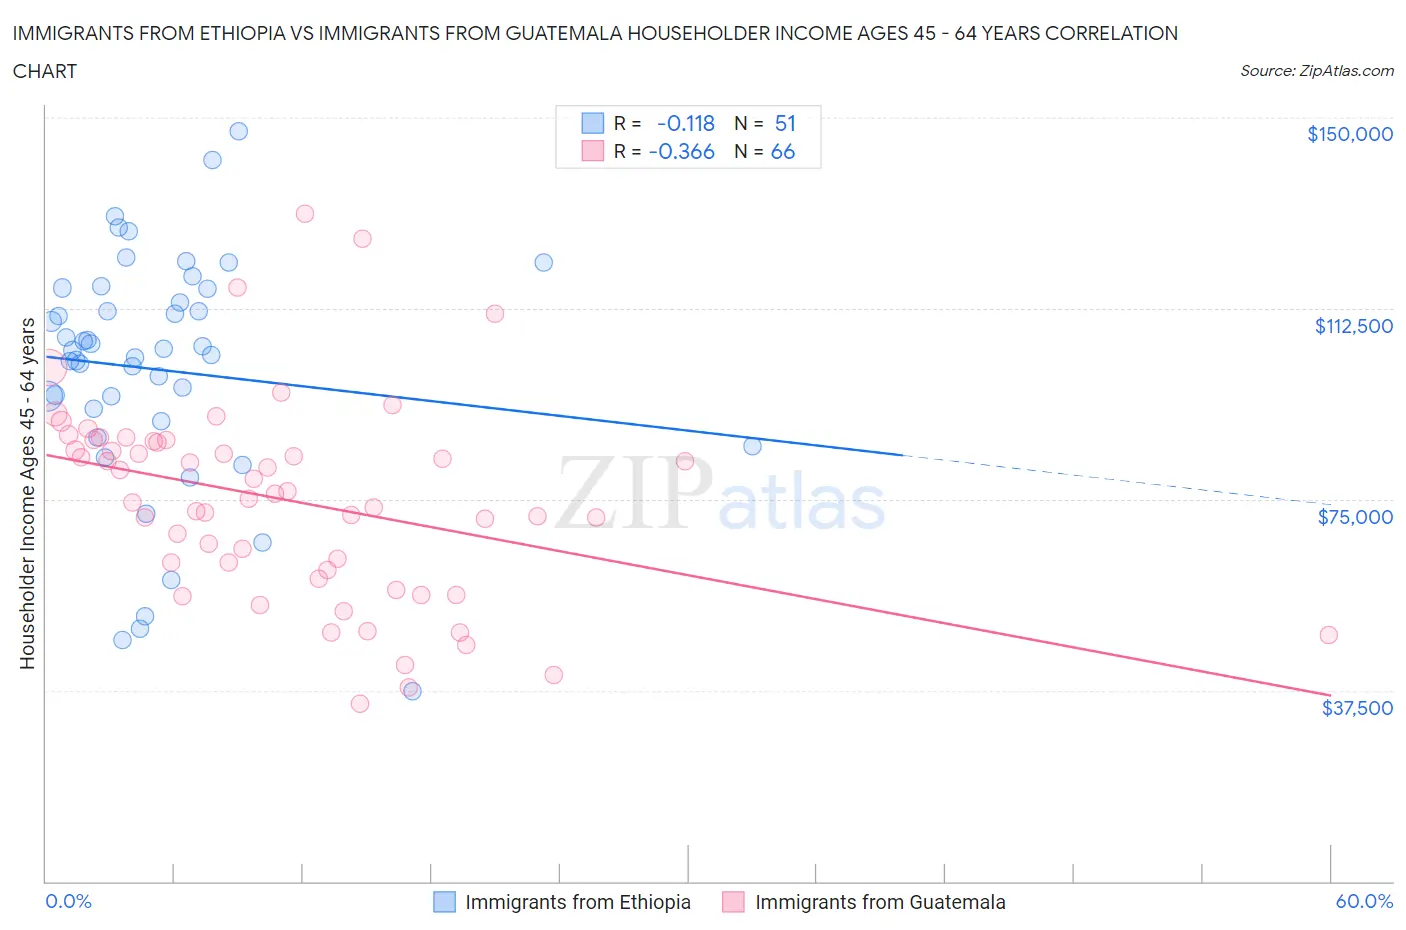 Immigrants from Ethiopia vs Immigrants from Guatemala Householder Income Ages 45 - 64 years